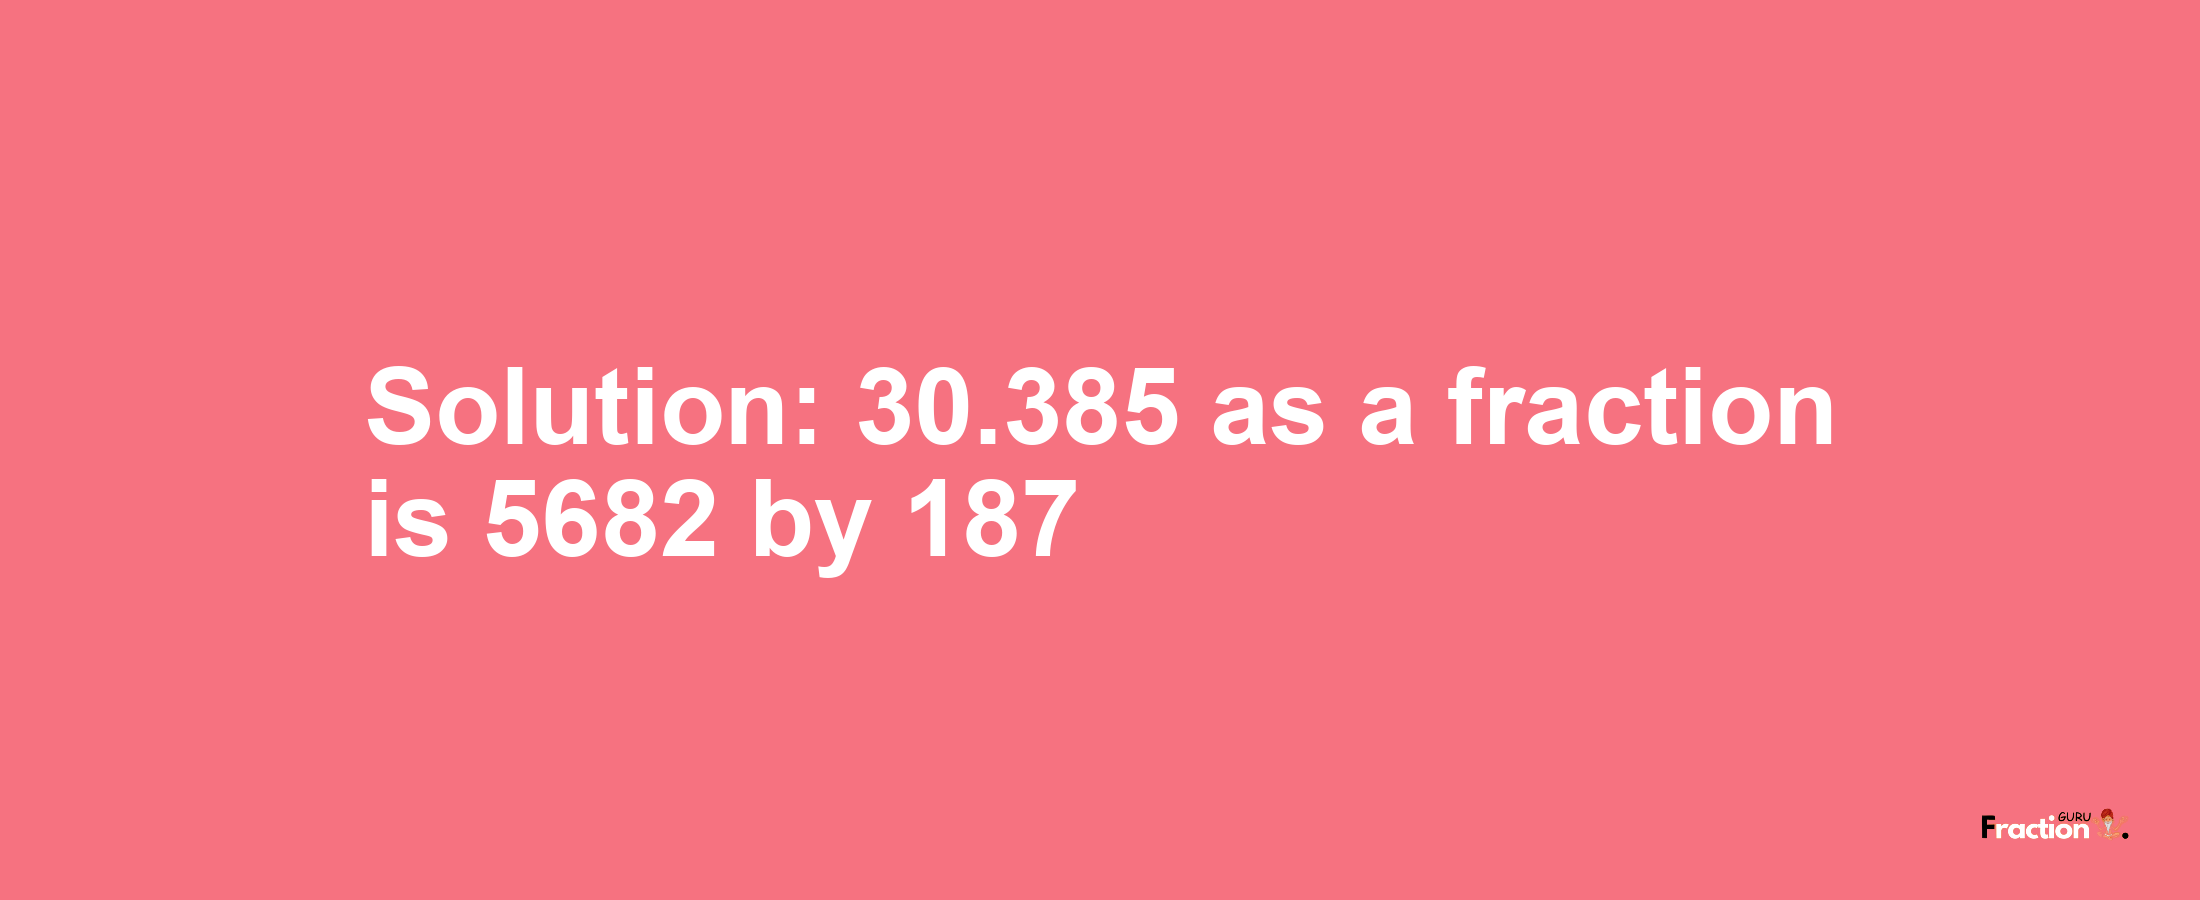 Solution:30.385 as a fraction is 5682/187